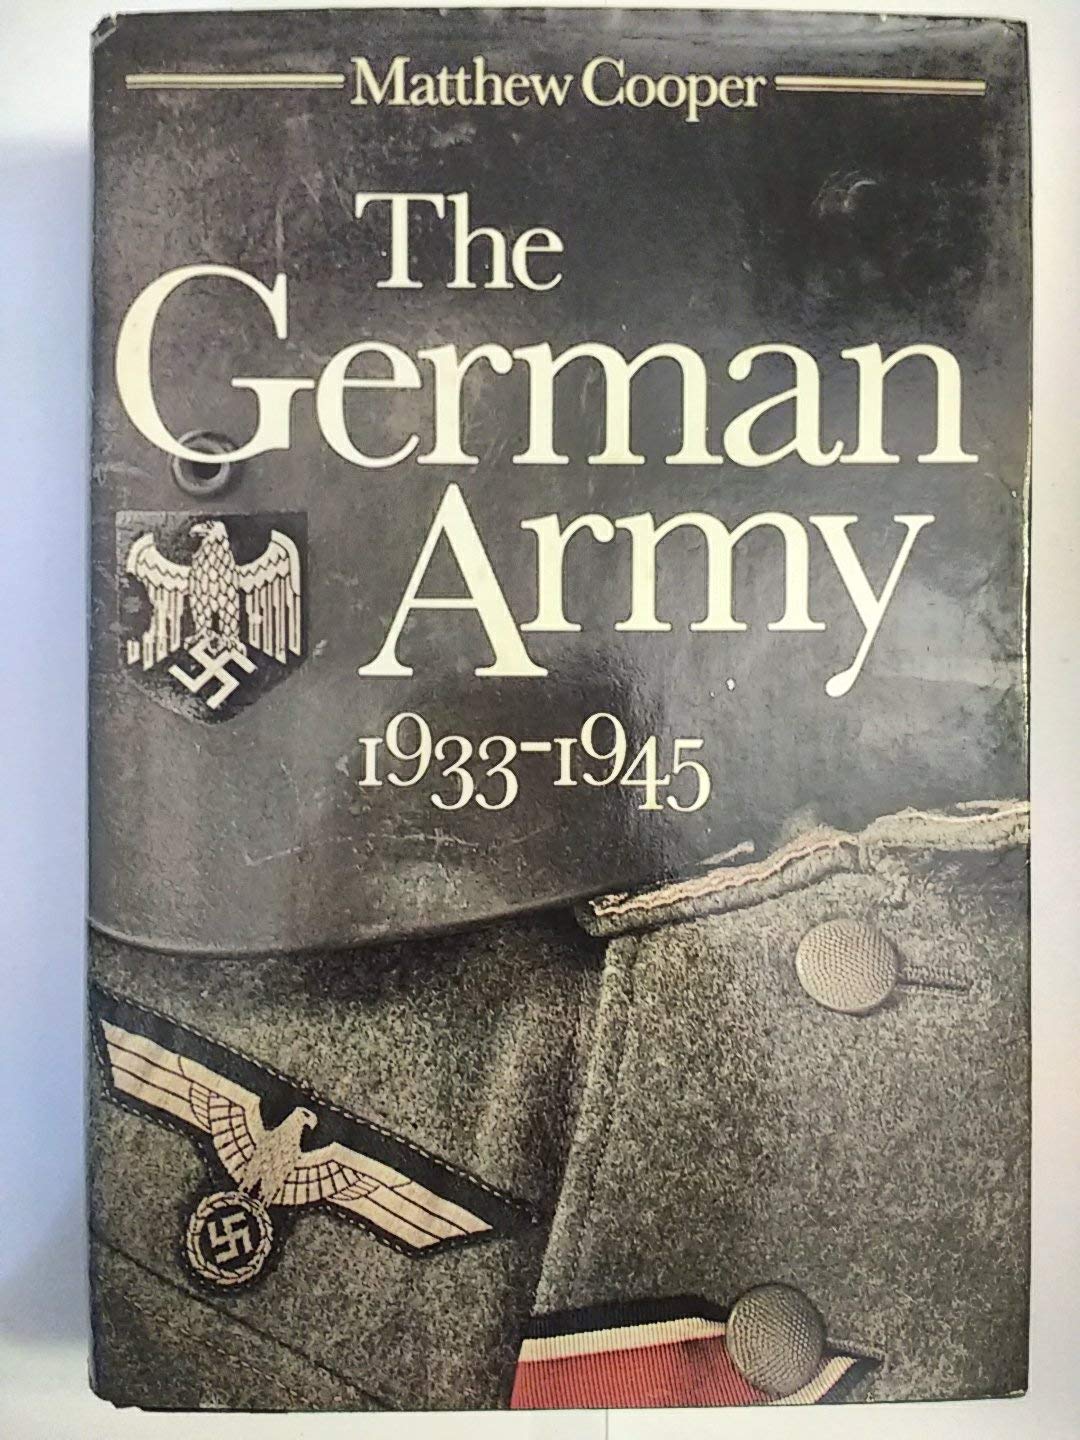 The German Army 1933-1945: Its Political and Military Failure